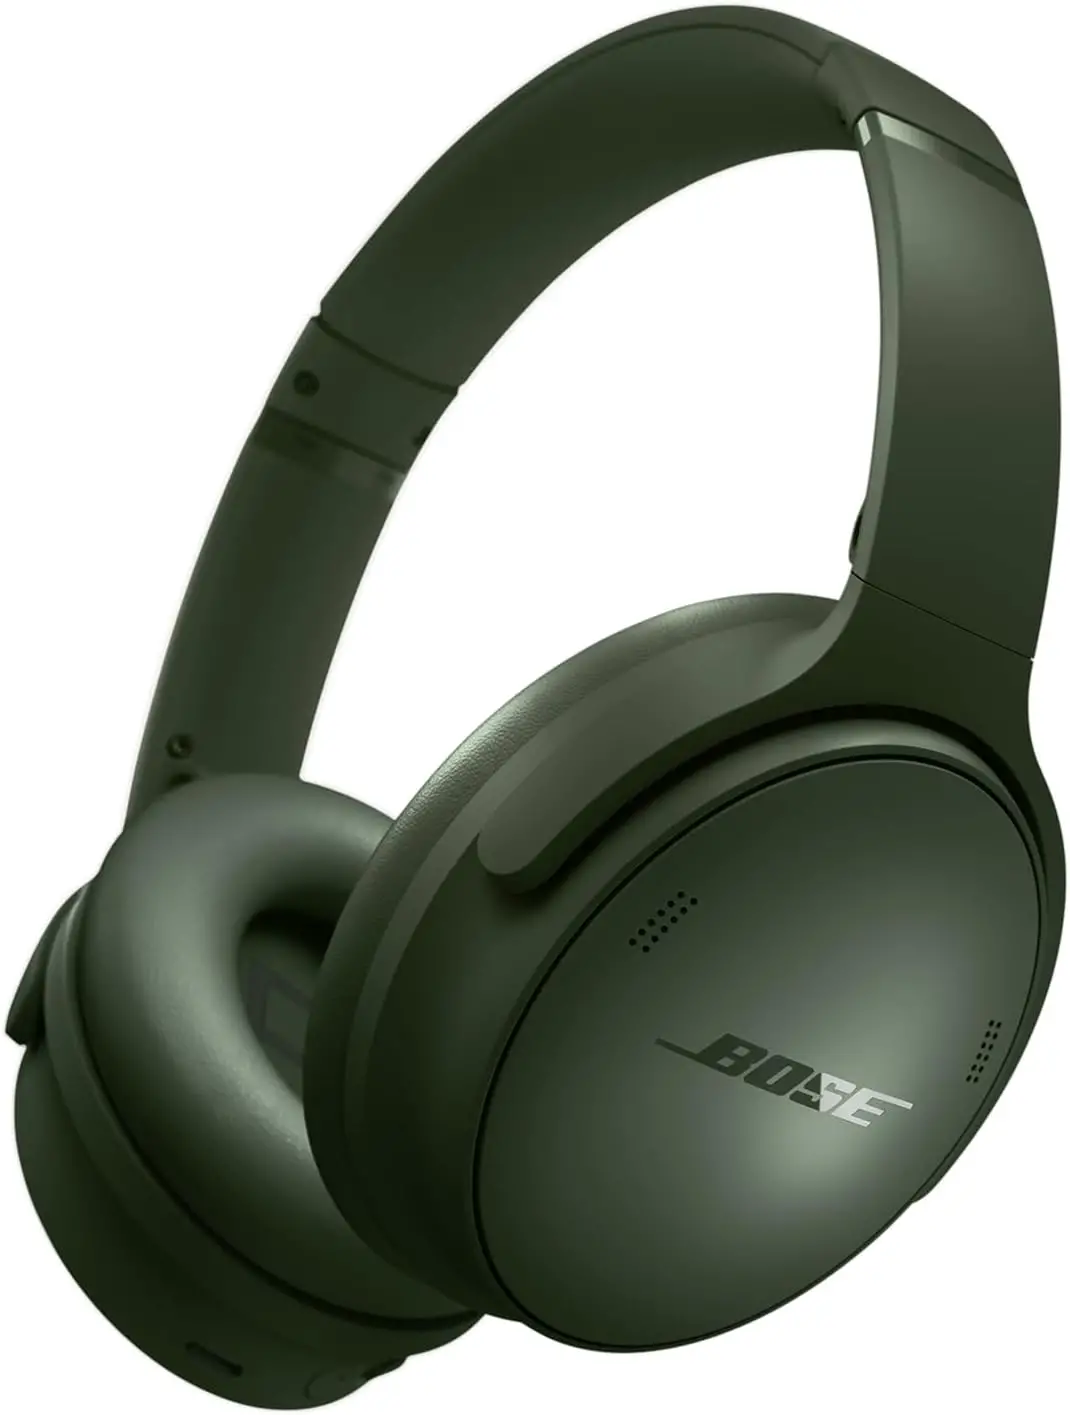 NEW Bose QuietComfort Wireless Noise Cancelling Headphones Bluetooth Over Ear Headphones with Up To 24 Hours of Battery Life Cypress Green Limited Edition